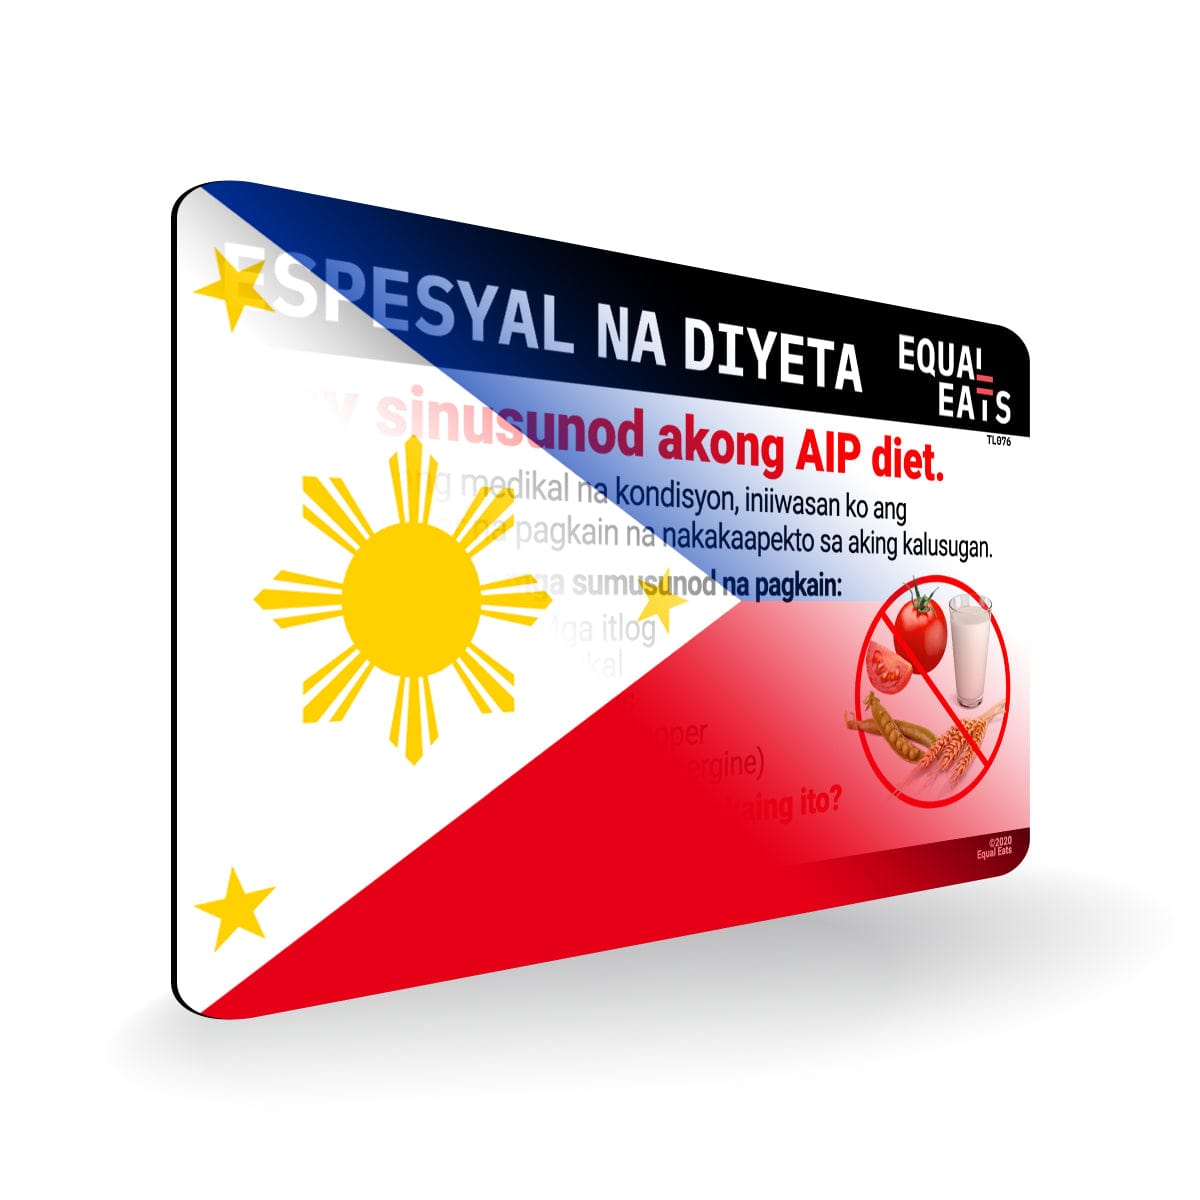 AIP Diet in Tagalog. AIP Diet Card for Philippines